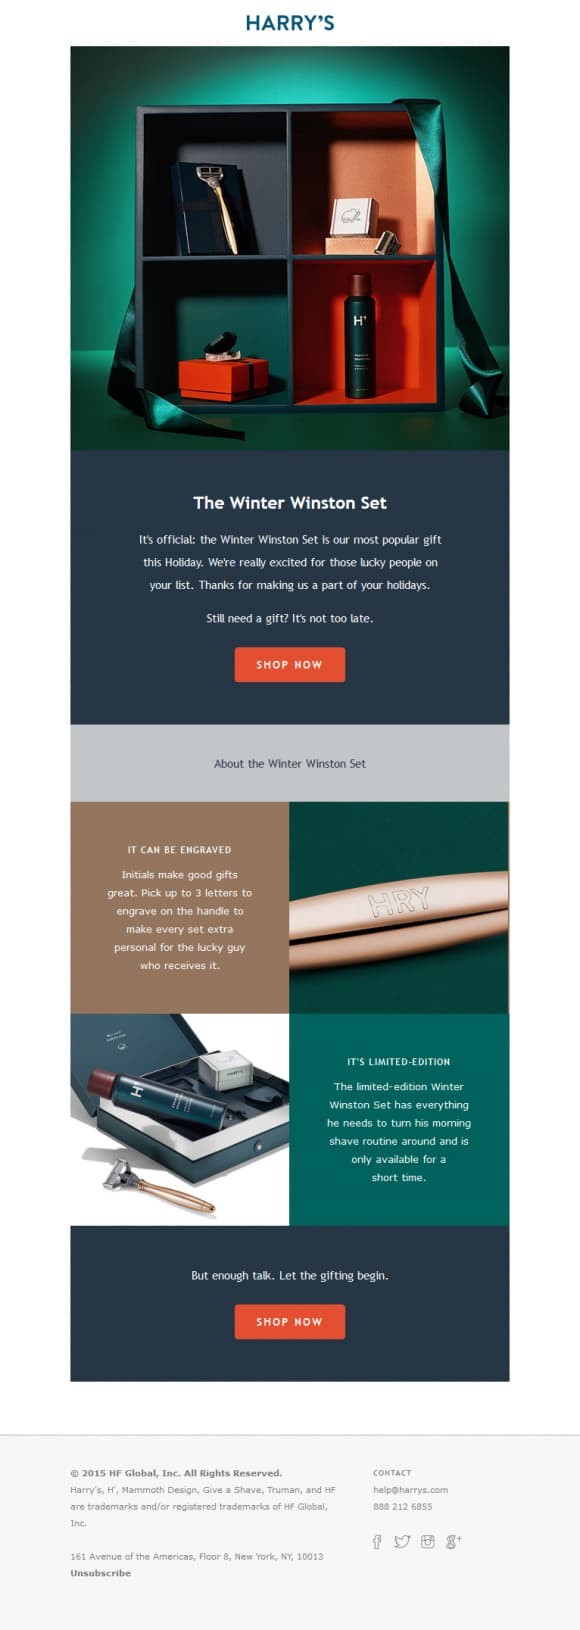 Html email inspiration; Harry’s winter set holiday email